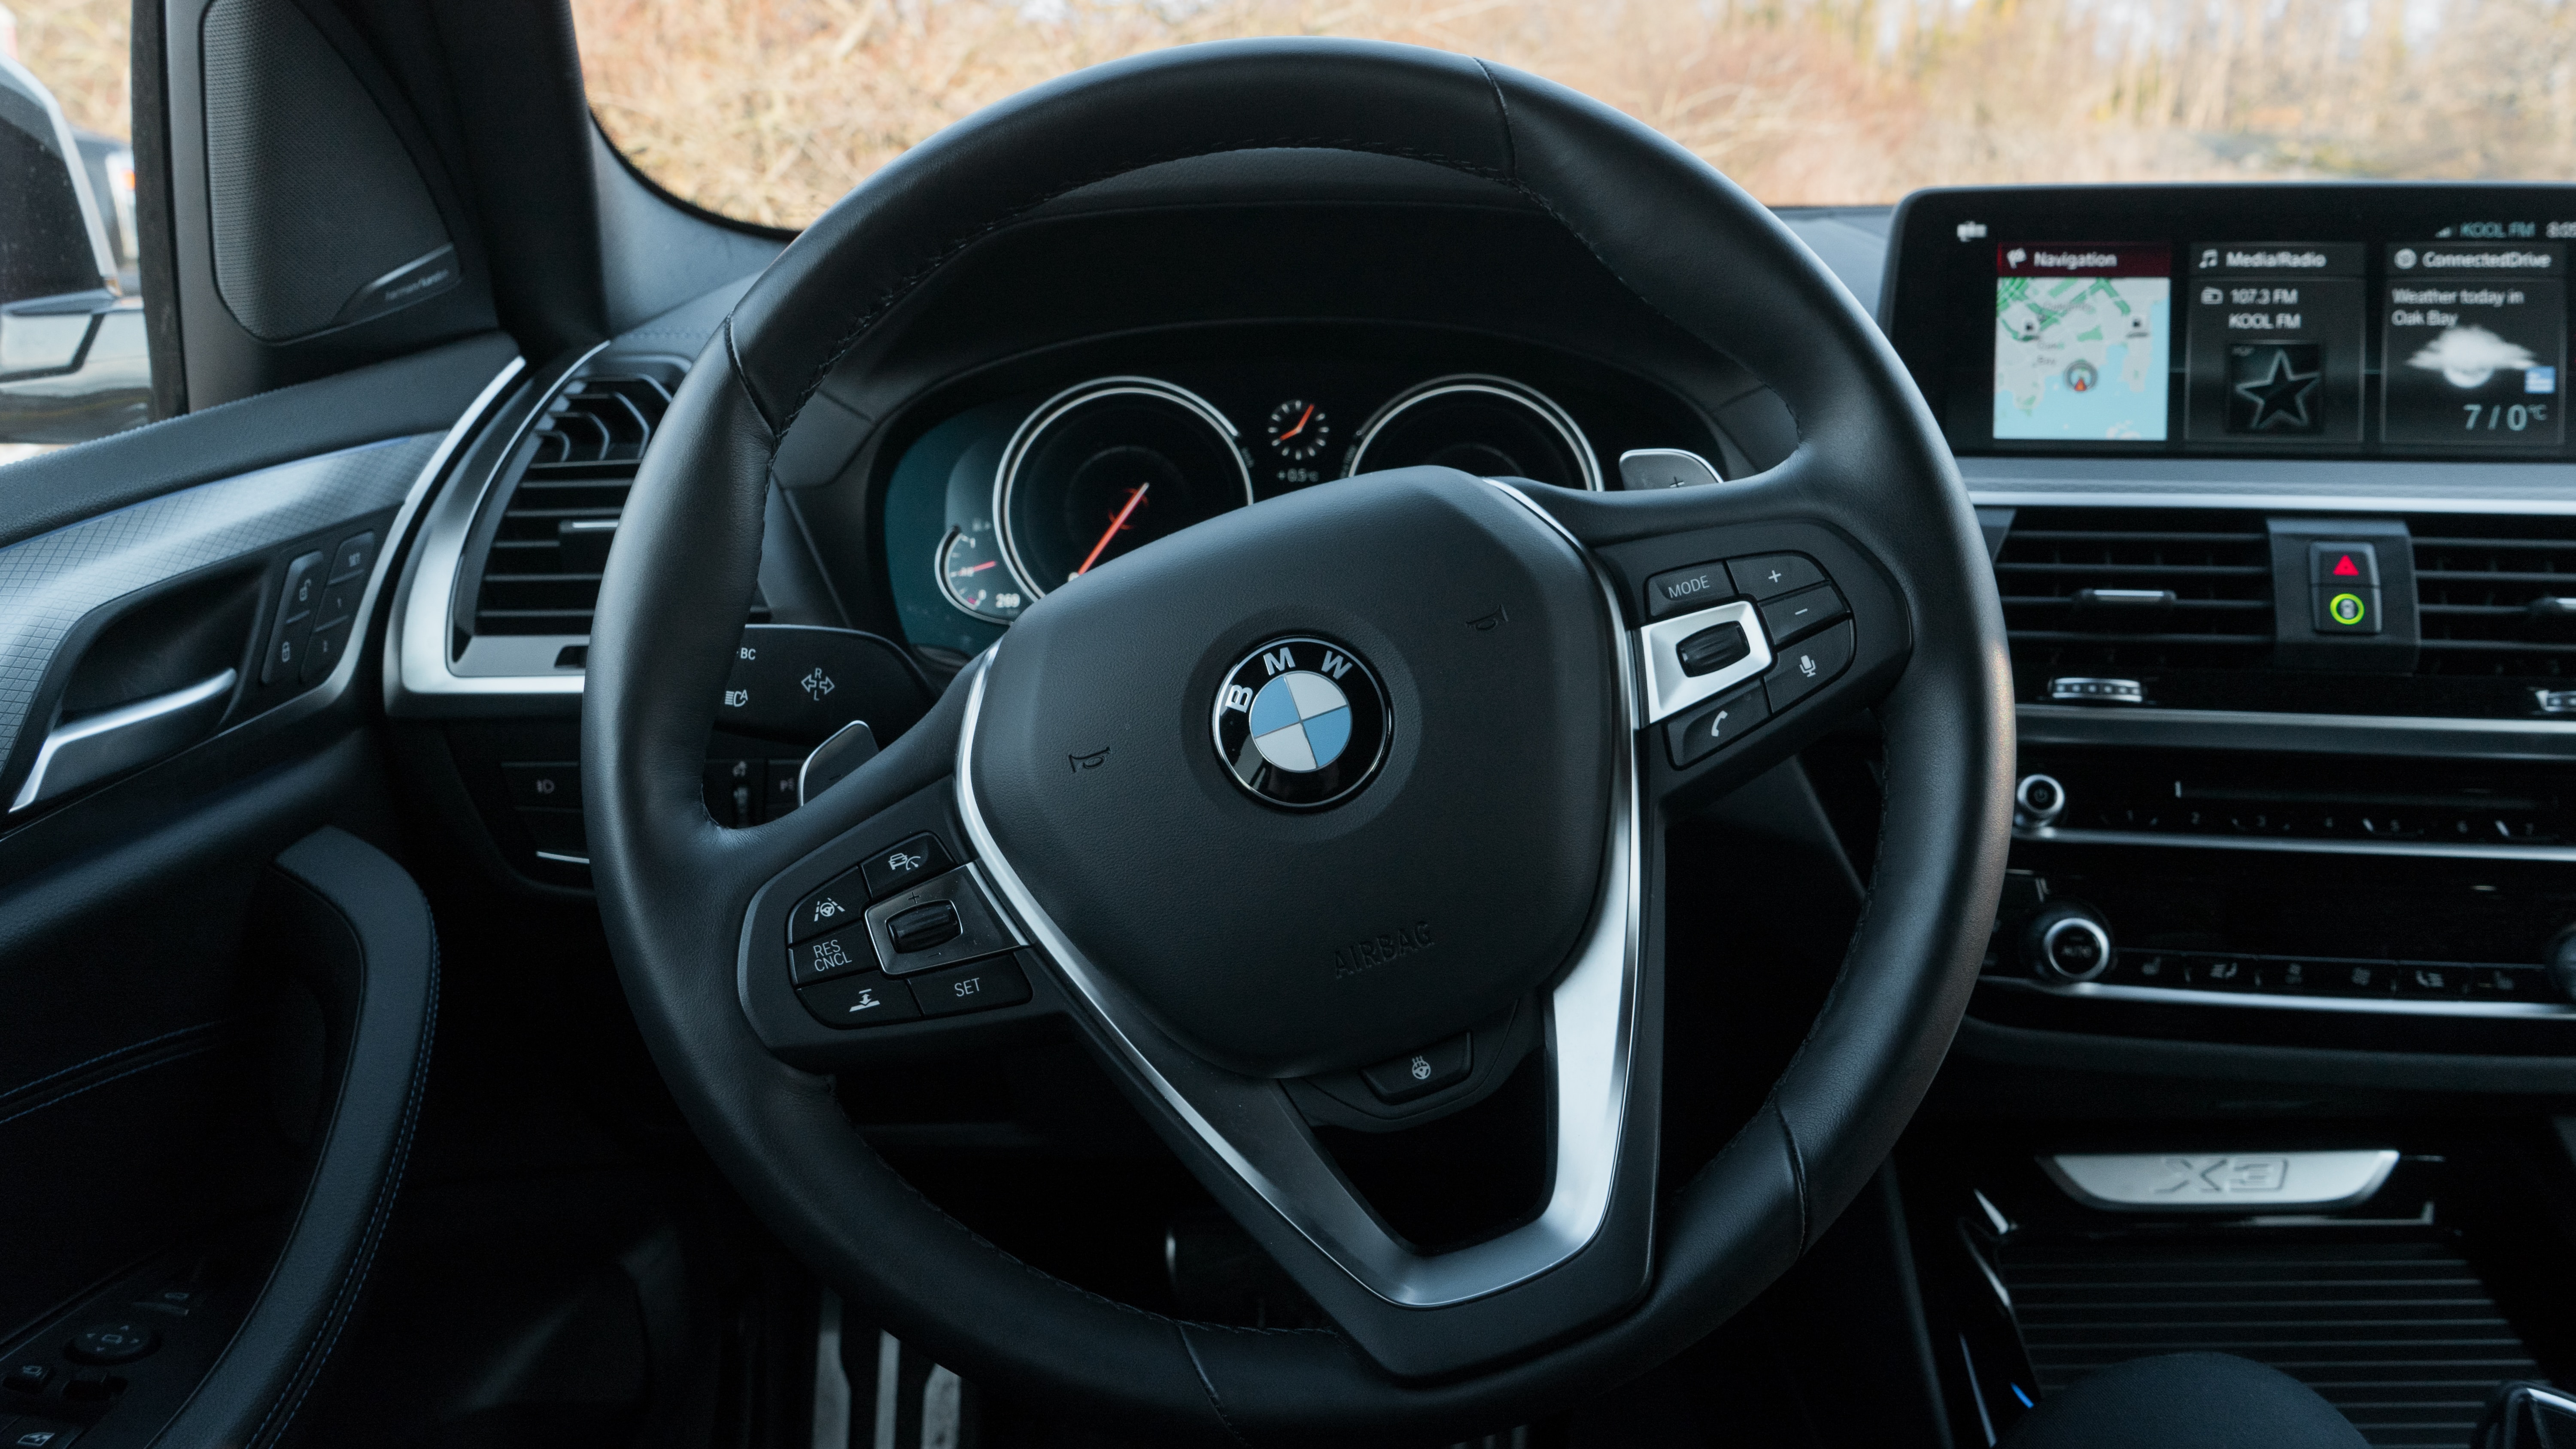 Your BMW Repair Specialist Shares Their Top Maintenance & Service Tips 2